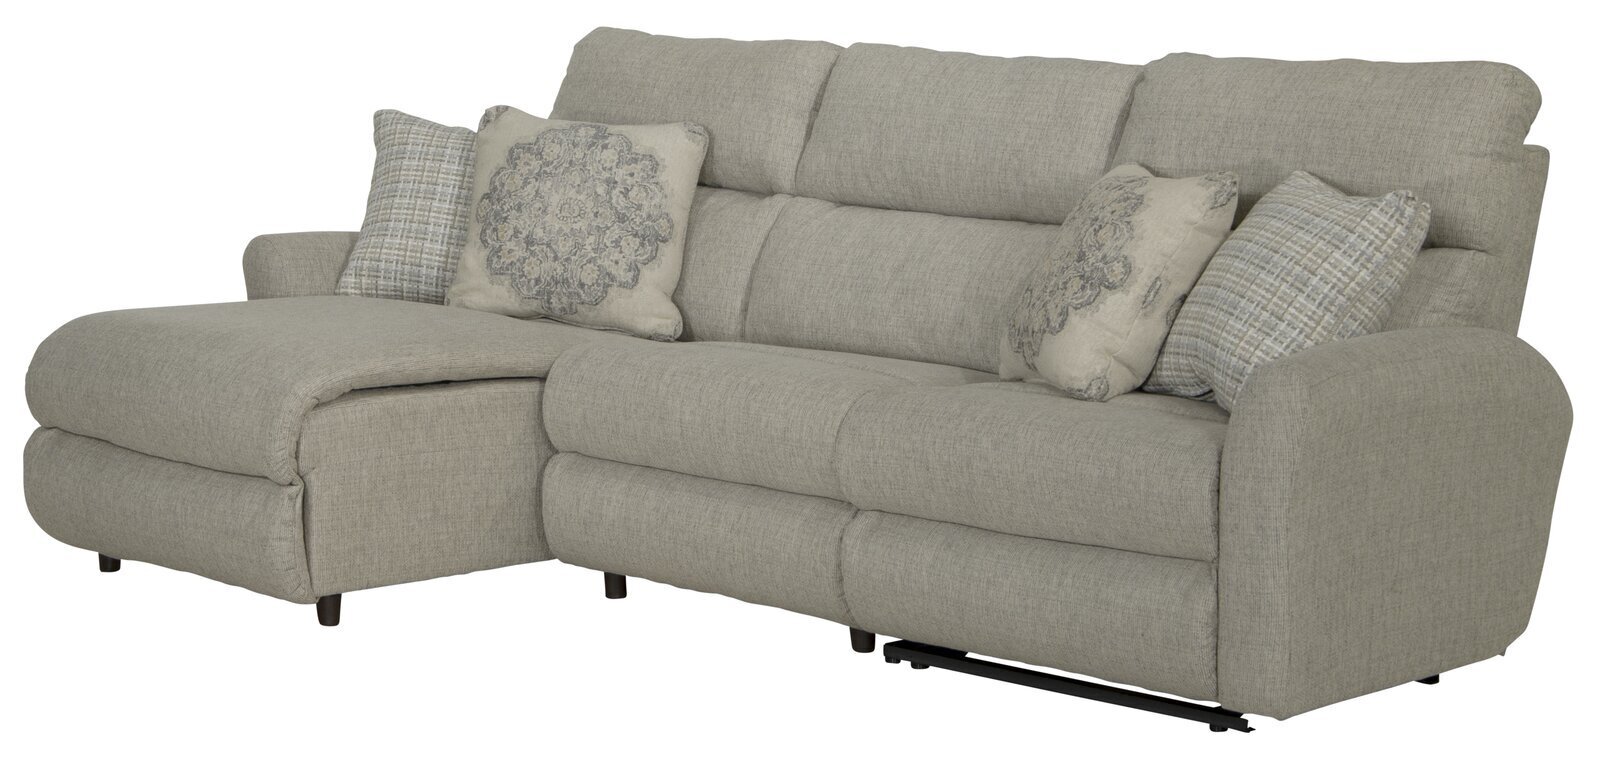 Contemporary Farmhouse Style Reclining Sectional